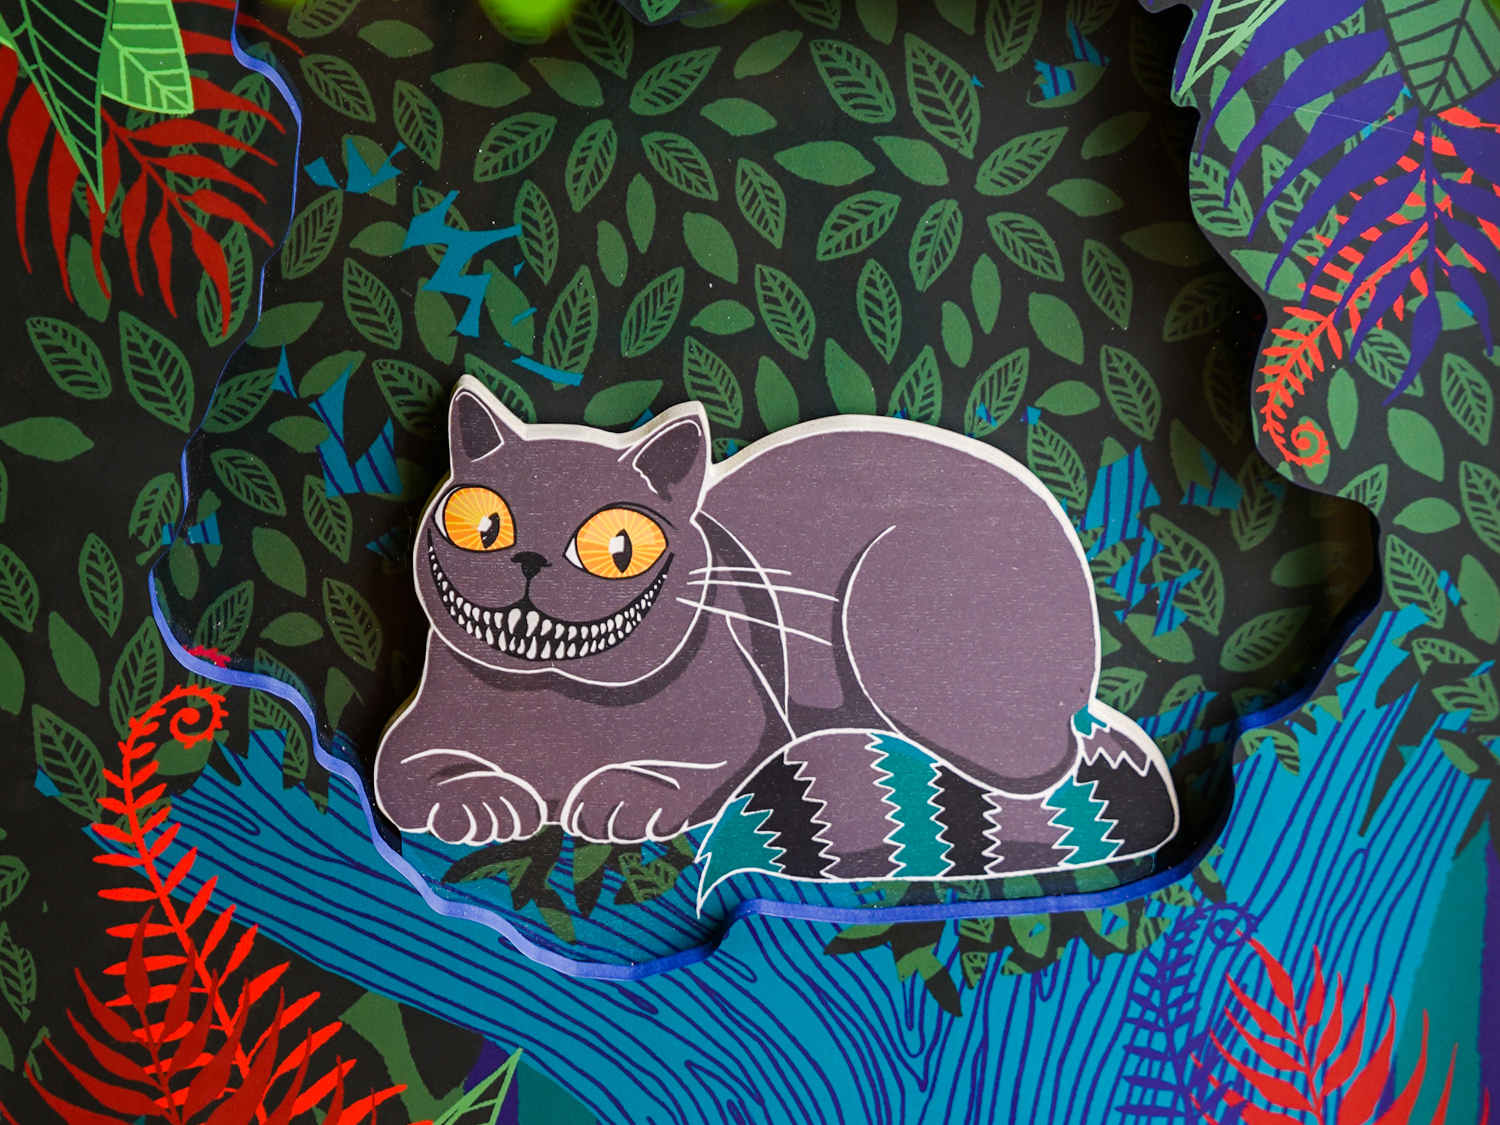 “Enchanted Journeys” features a cat from “Alice’s Adventures in Wonderland.” (Source: MinaLima)